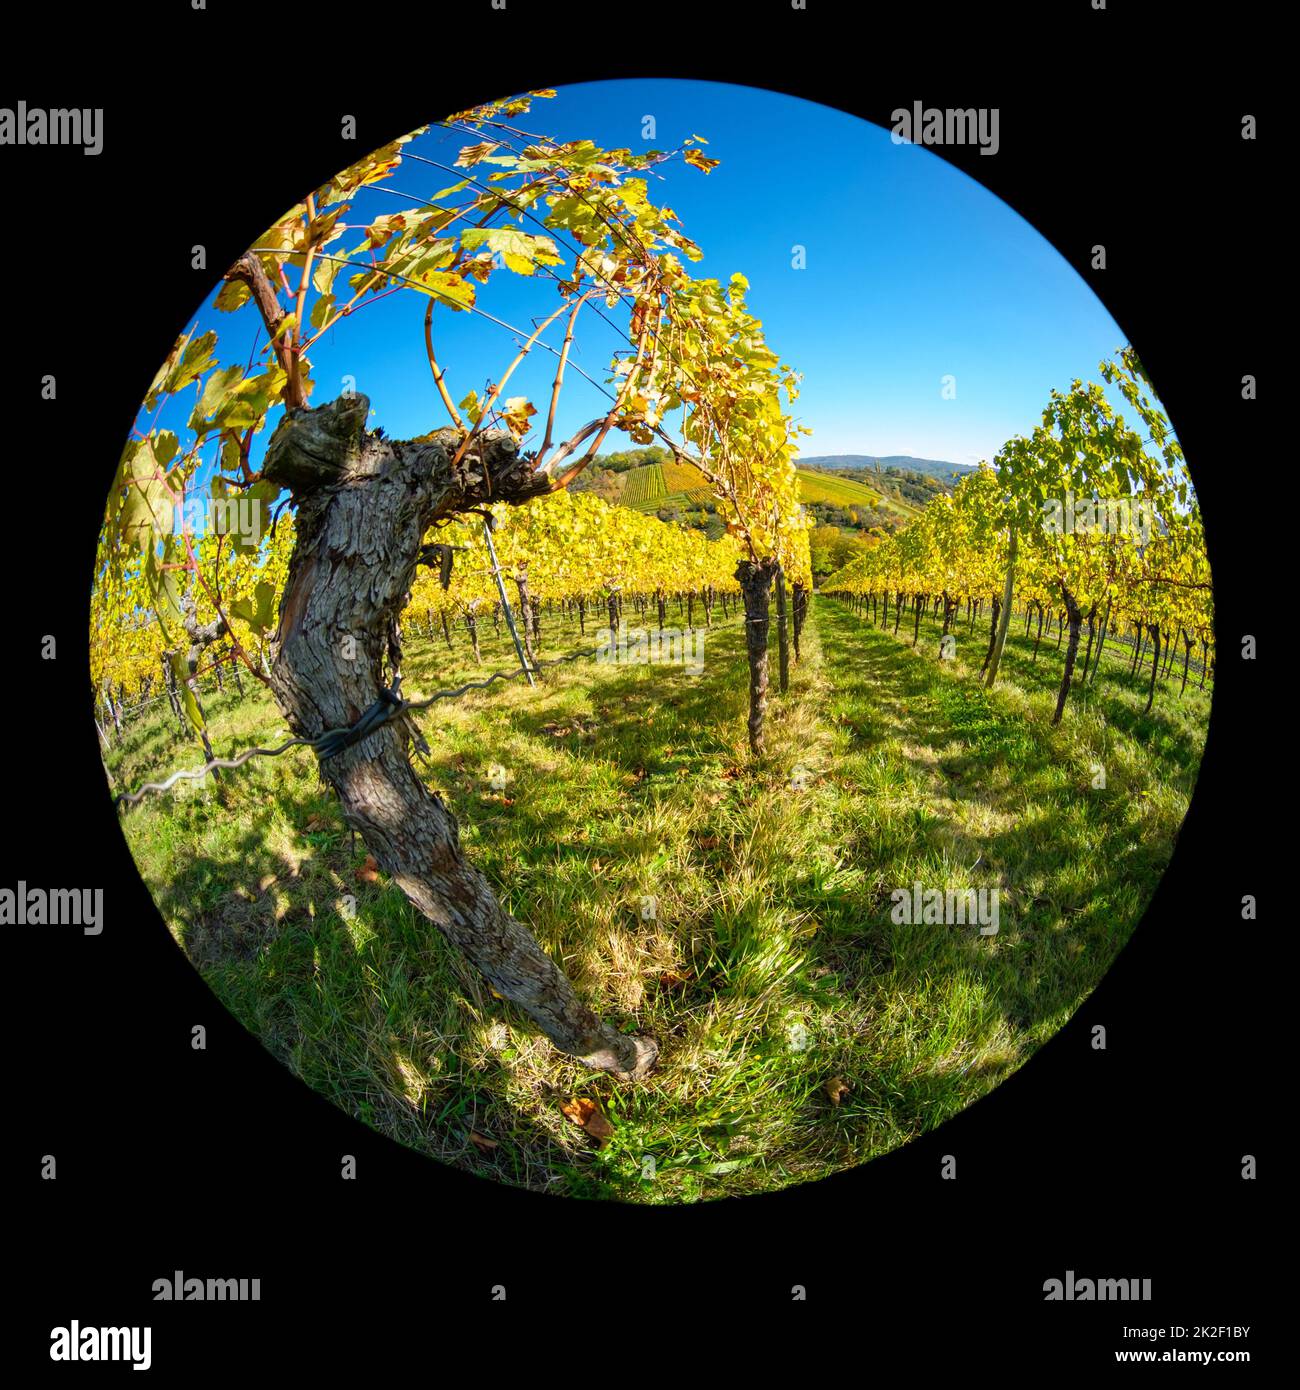 Old gnarled vine in a vineyard in fish-eye lens Stock Photo